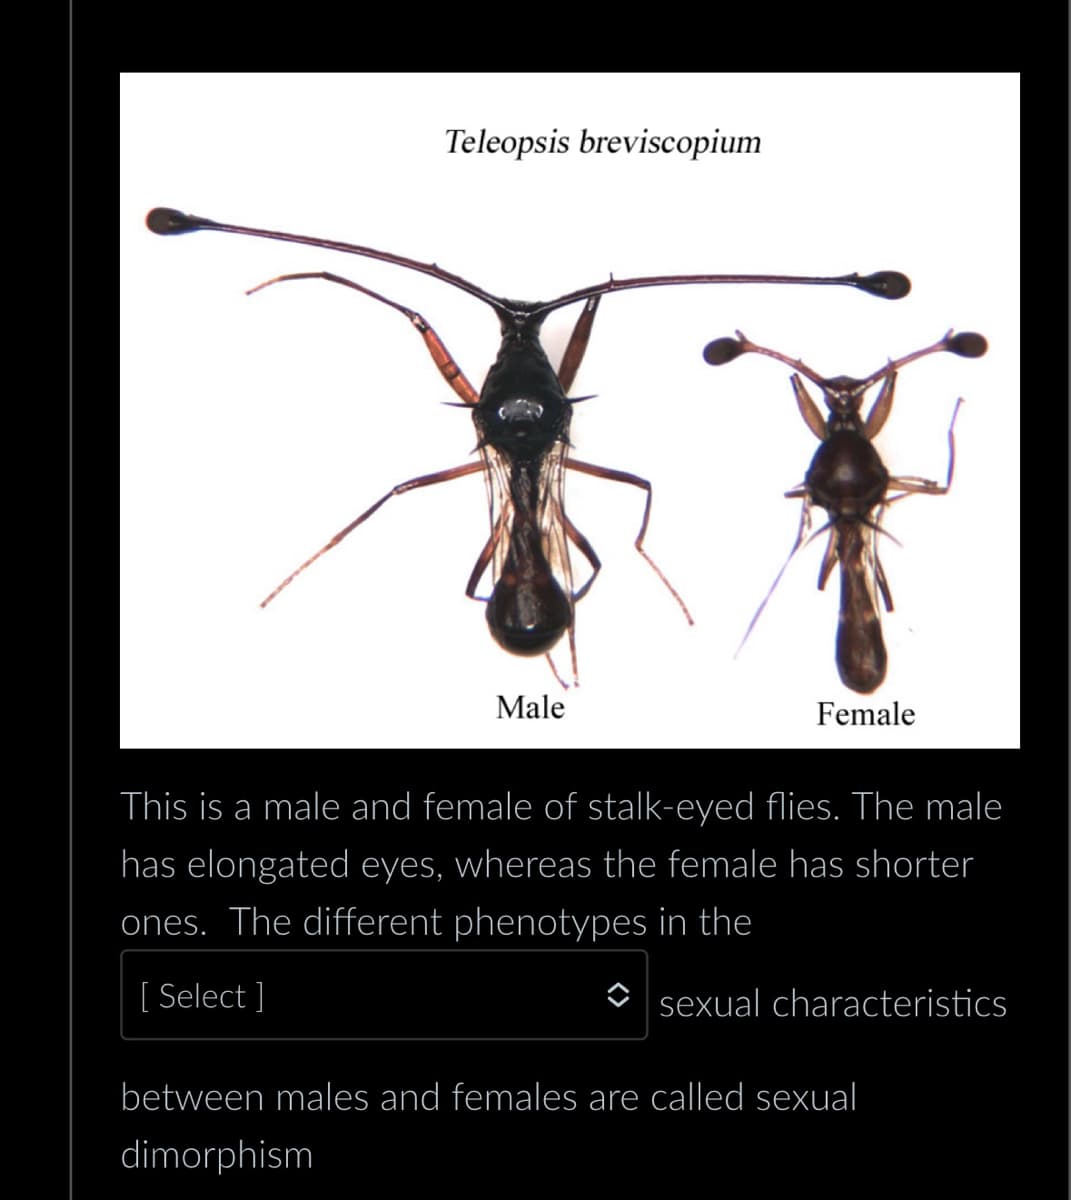 Teleopsis breviscopium
Male
Female
This is a male and female of stalk-eyed flies. The male
has elongated eyes, whereas the female has shorter
ones. The different phenotypes in the
[Select]
sexual characteristics
between males and females are called sexual
dimorphism